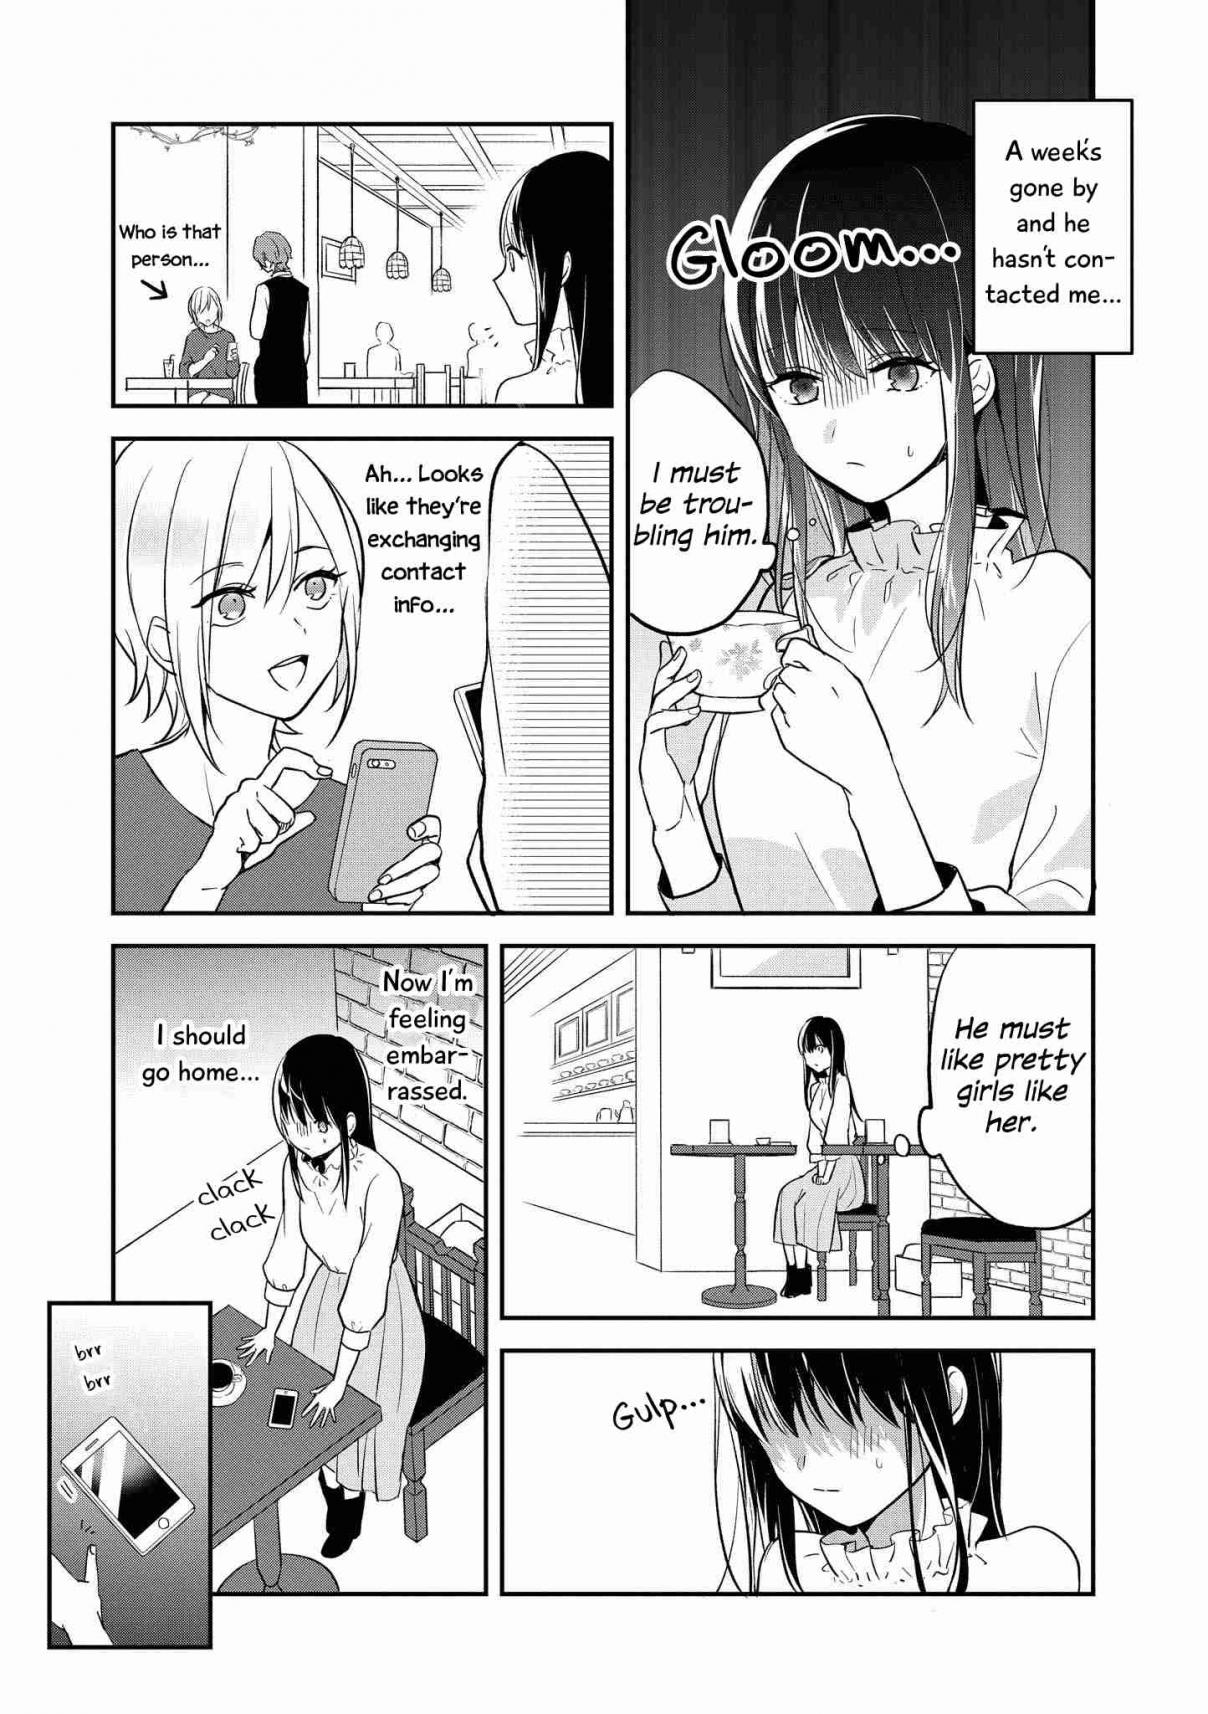 “It’s Too Precious and Hard to Read!!” 4P Short Stories Vol. 2 Ch. 41 The Cafe Manager and the Regular [Paru Konno]